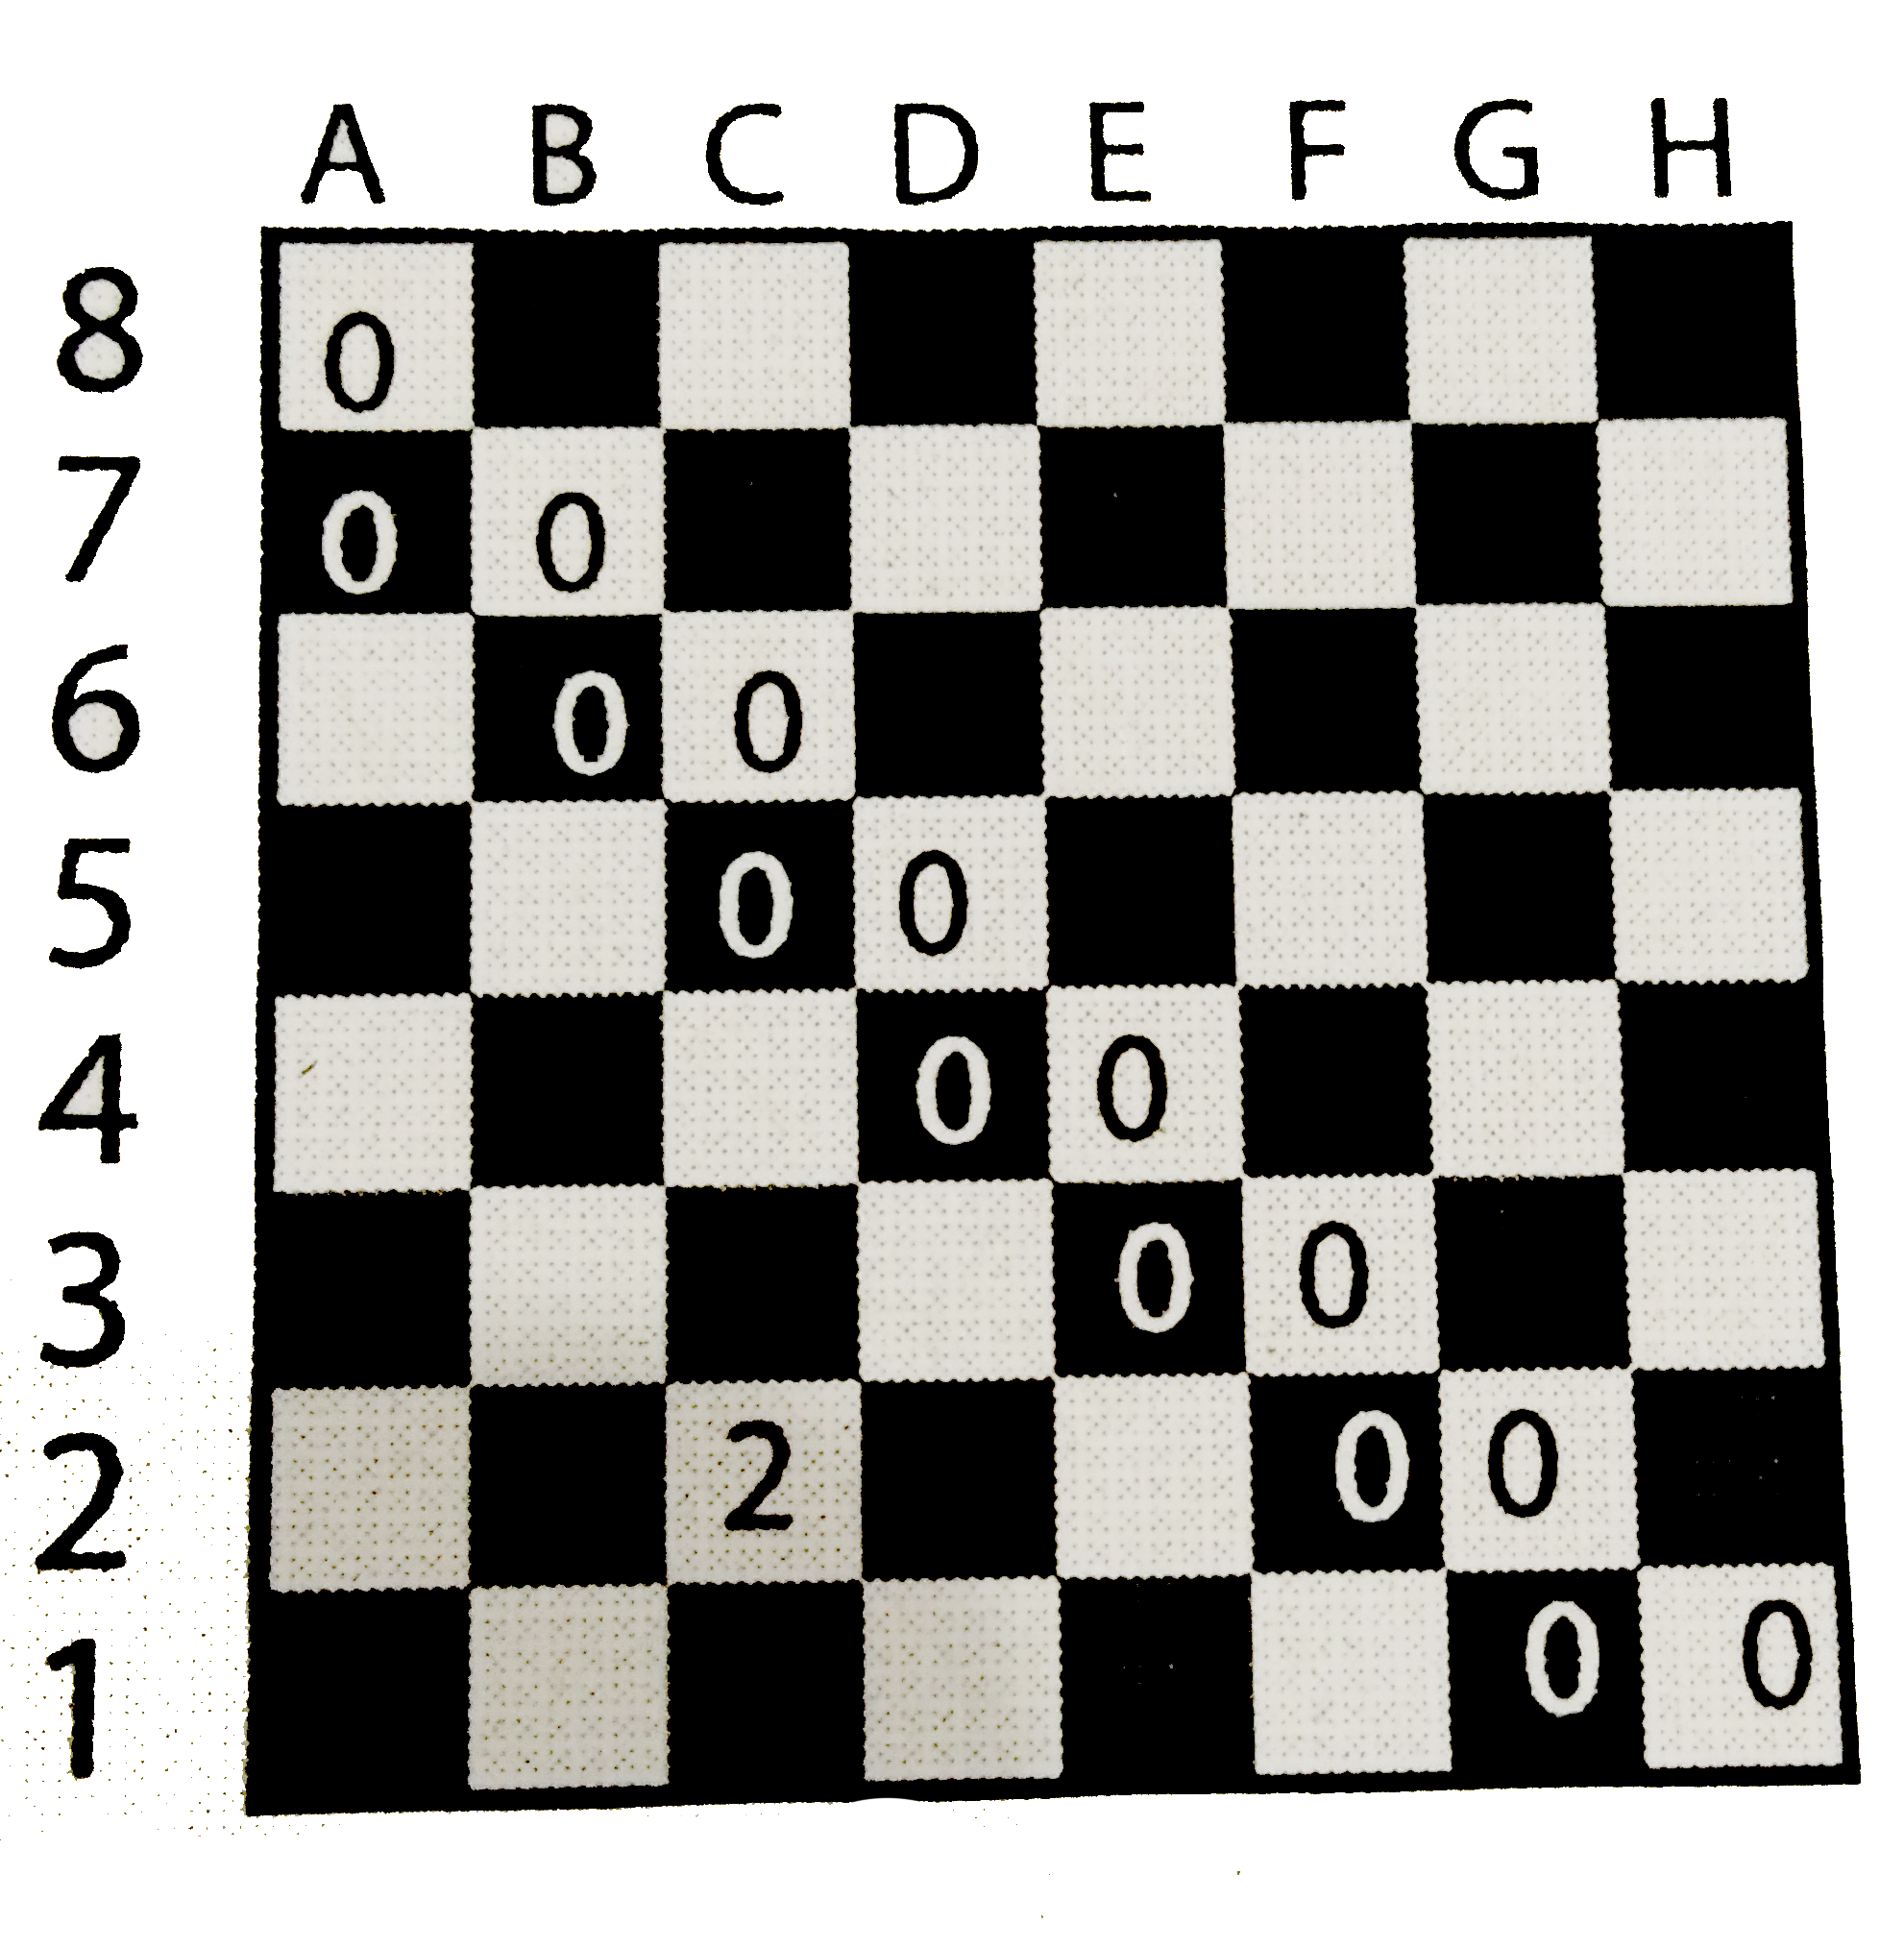 You have one knight, one king, one queen, one rook and one pawn each of the same colour. Arrange all five of these pieces on the chessboard shown such that the following conditions are satisfied: (i)   The no. of pieces attacking a square(with a number on it) should be equal to the number written on it. (ii)  There should not be any piece on a square which has a number written on it.   [Note: A king can only attack its adjacent squares, a pawn attacks its diagonally adjacent squares, a rook on its horizontal and vertical lines, a queen on its horizontal, vertical and diagonal lines and a knight as explained in question 1. Lastly, rook and queen cannot attack a square if there is a some other piece in the path of attack.]   What should be the position of the Queen?